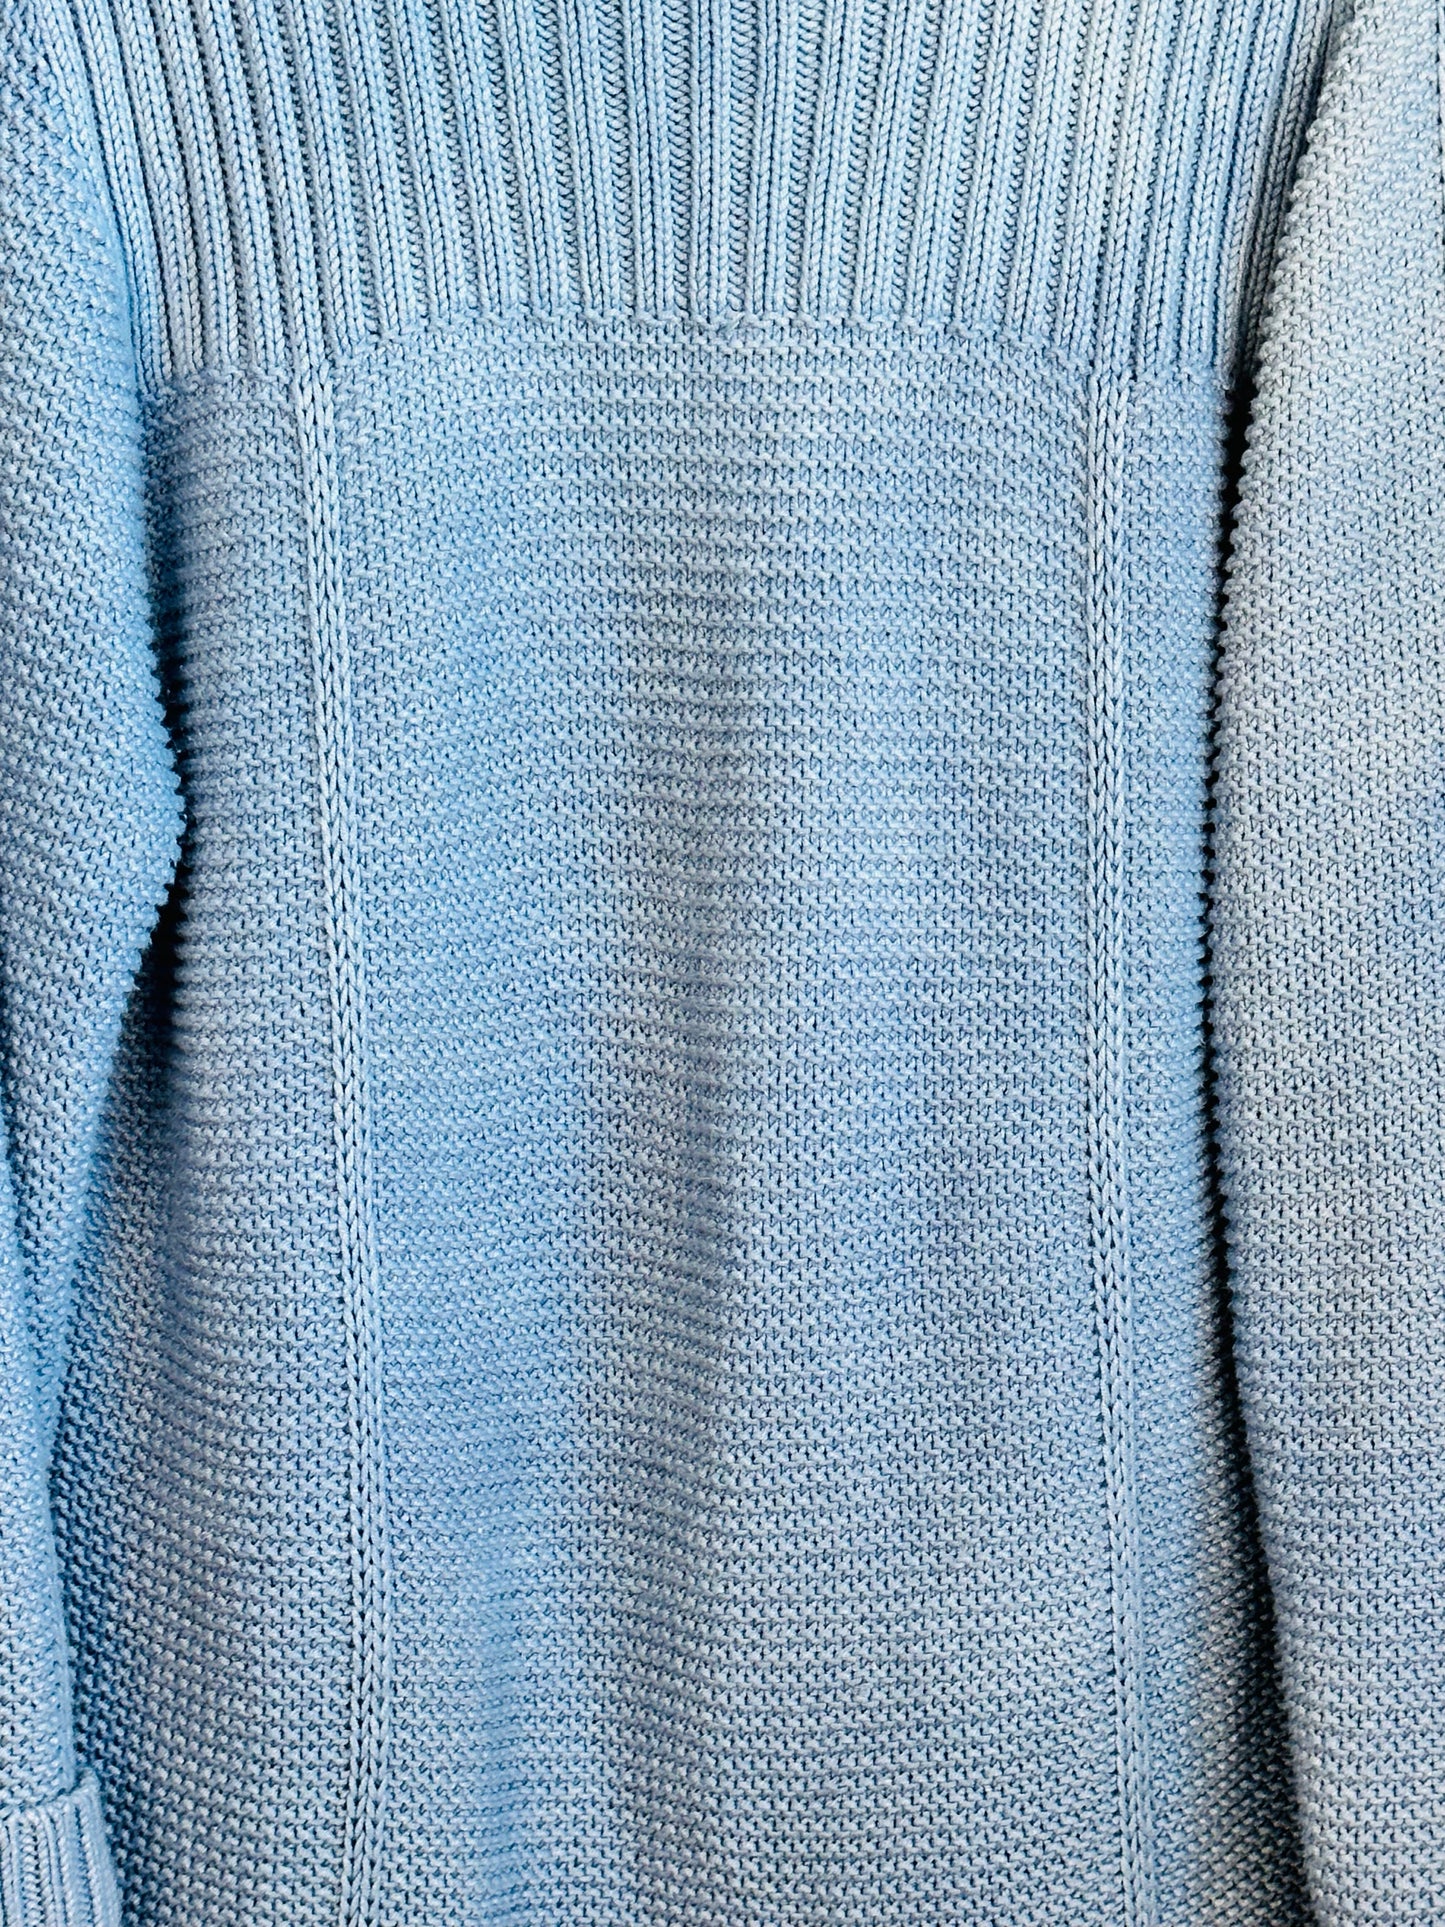 Super Soft Everyday Cotton Sweater / Hand Dyed by Sharon